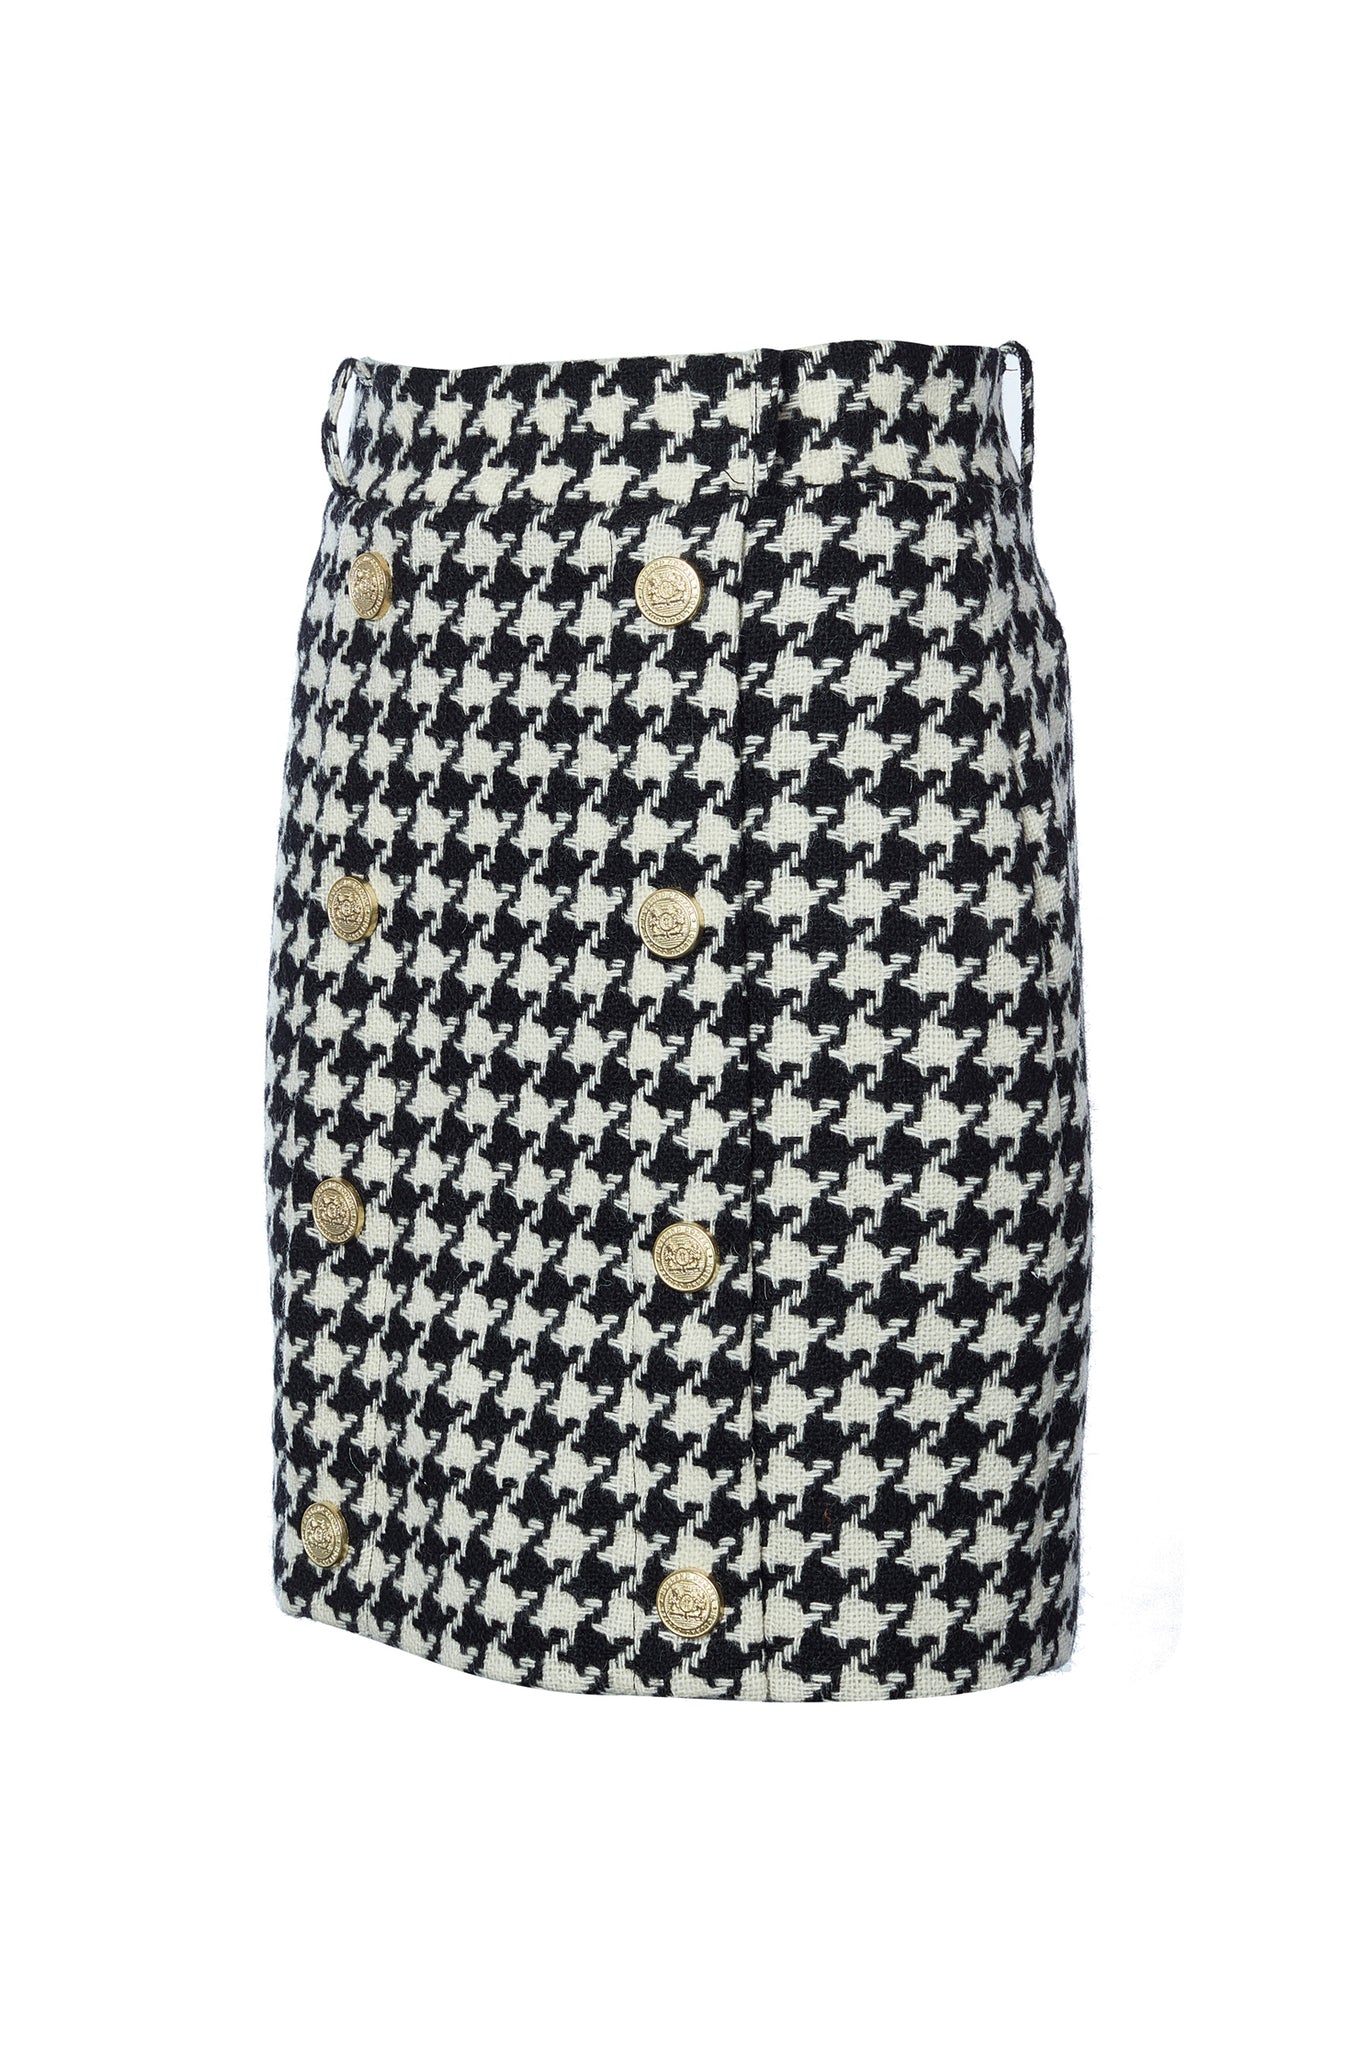 womens black and white large scale houndstooth wool pencil mini skirt with concealed zip fastening on centre back and gold rivets down front